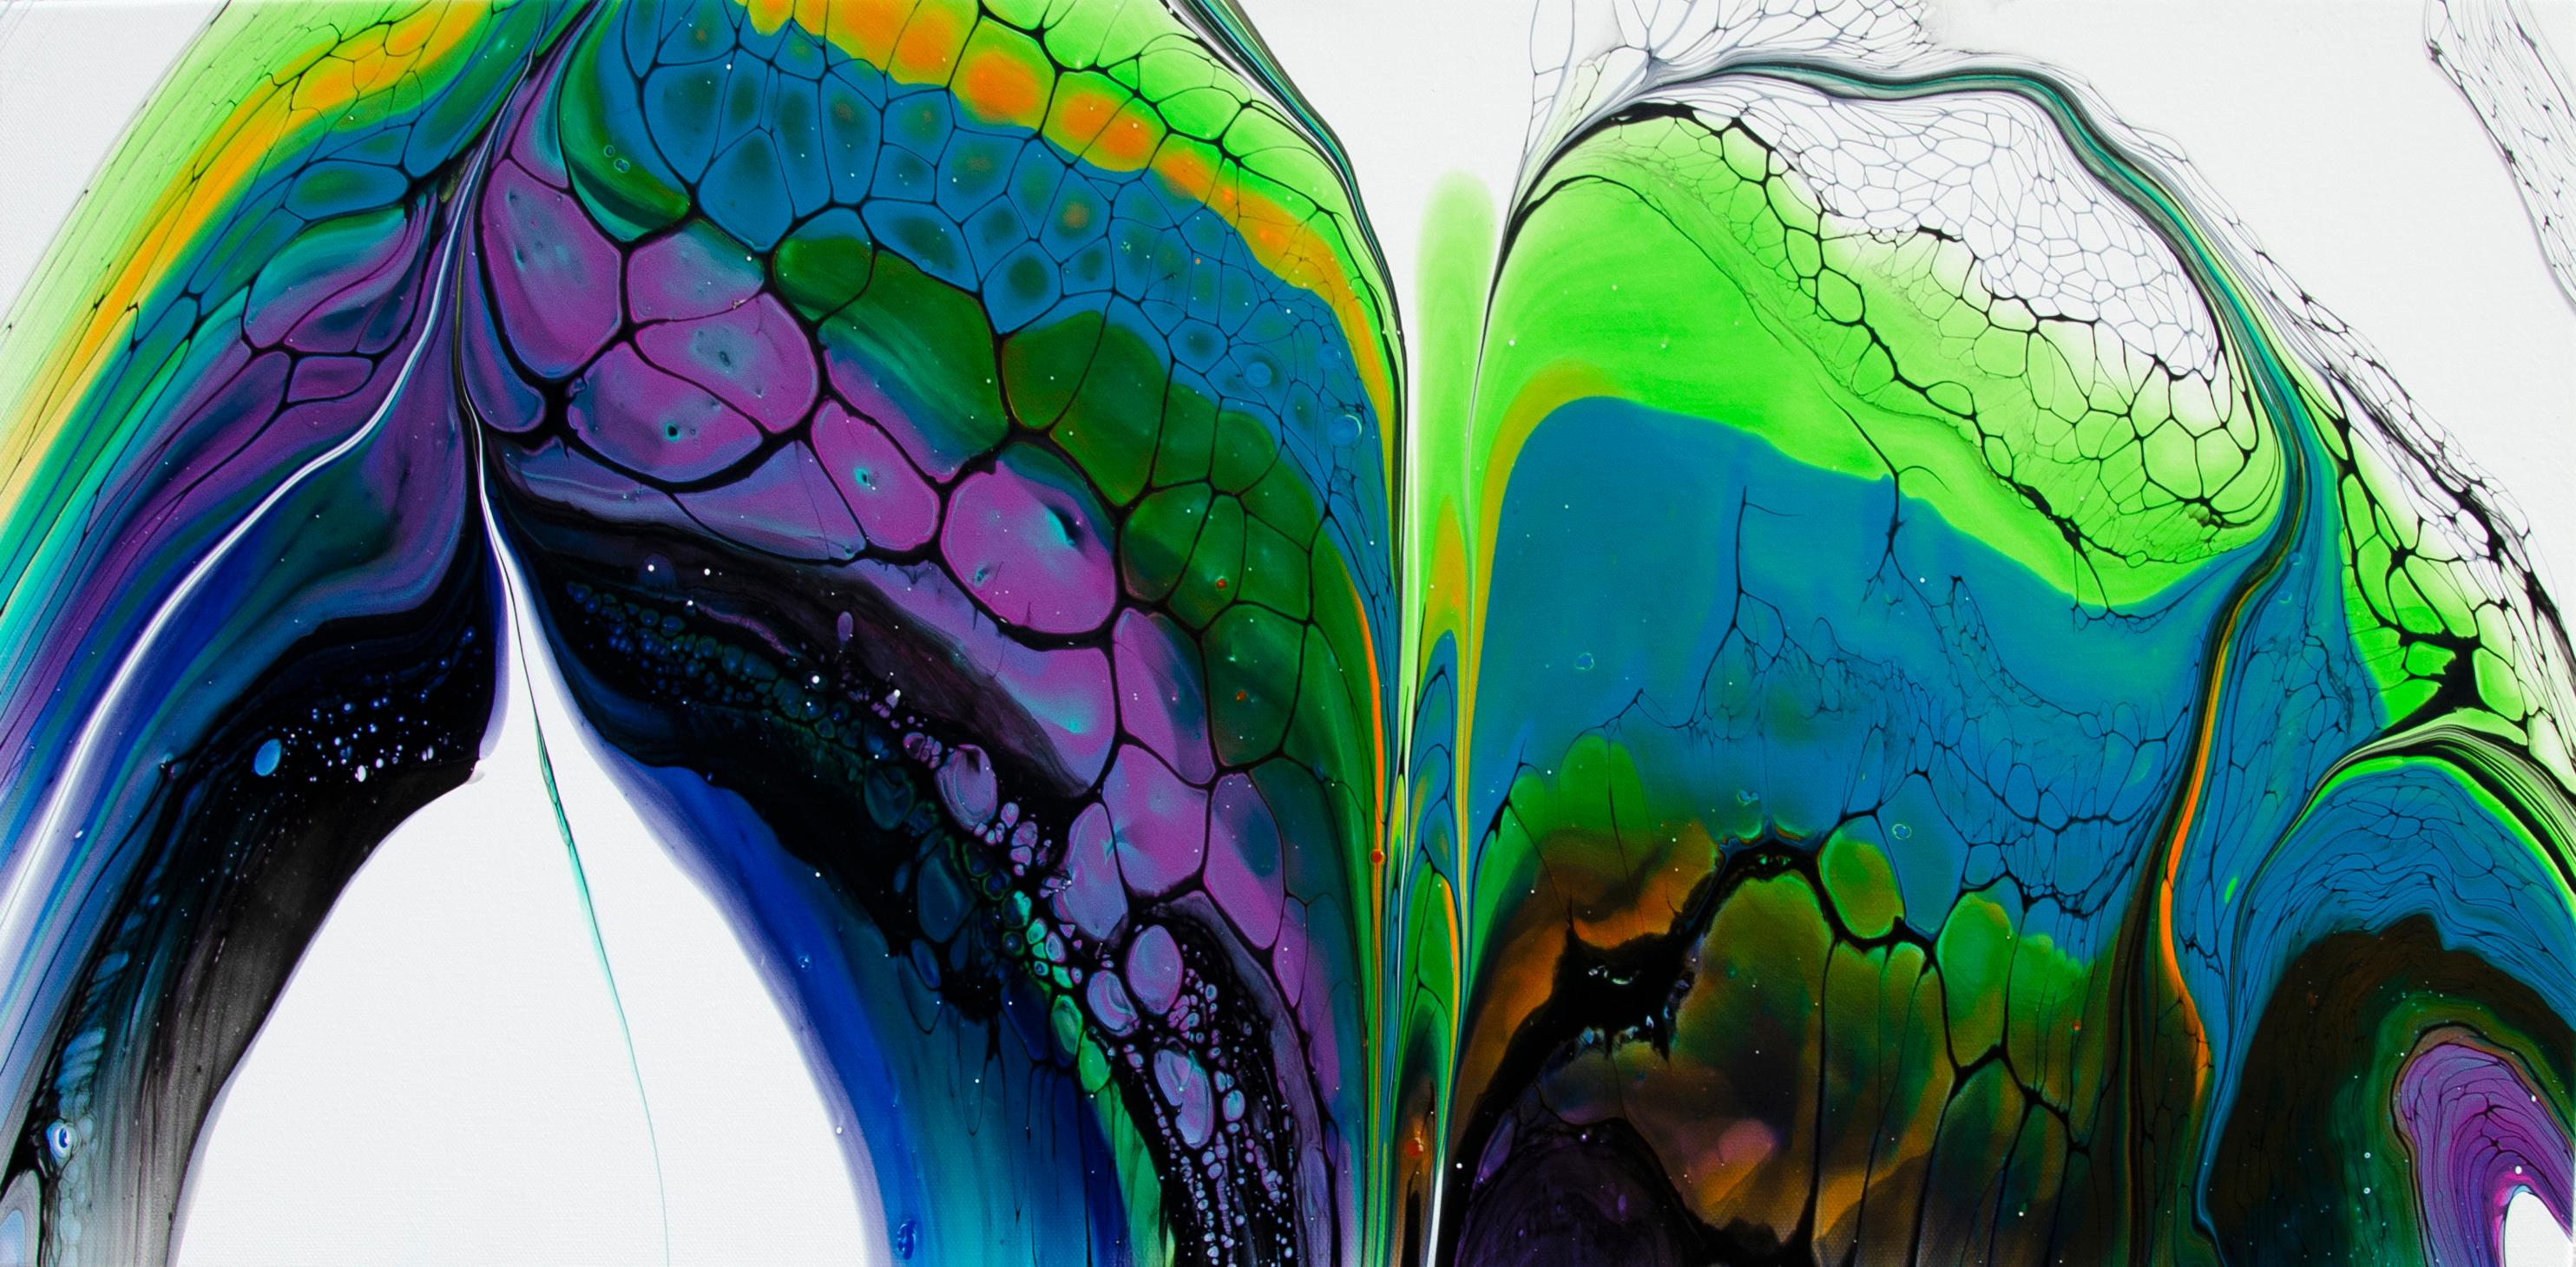 <p>Artist Comments<br>This abstract piece, created using the acrylic pouring technique, blends vibrant magenta, blue, and green hues. "U" shapes dominate the piece, recurring throughout the negative and positive spaces. Black cells form organic